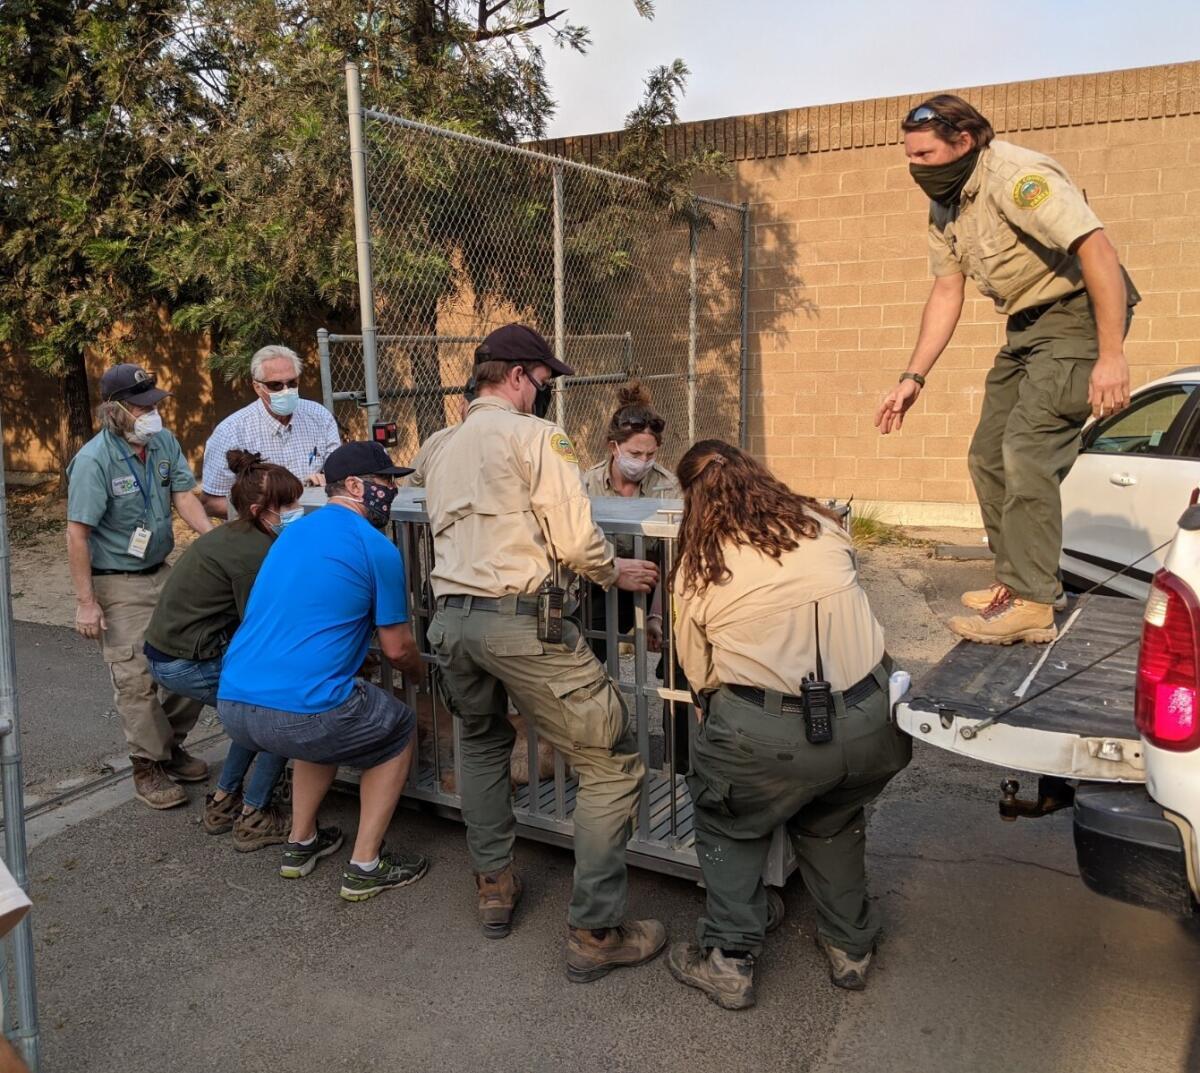 Zookeepers and staff members load a caged animal onto a pickup truck.